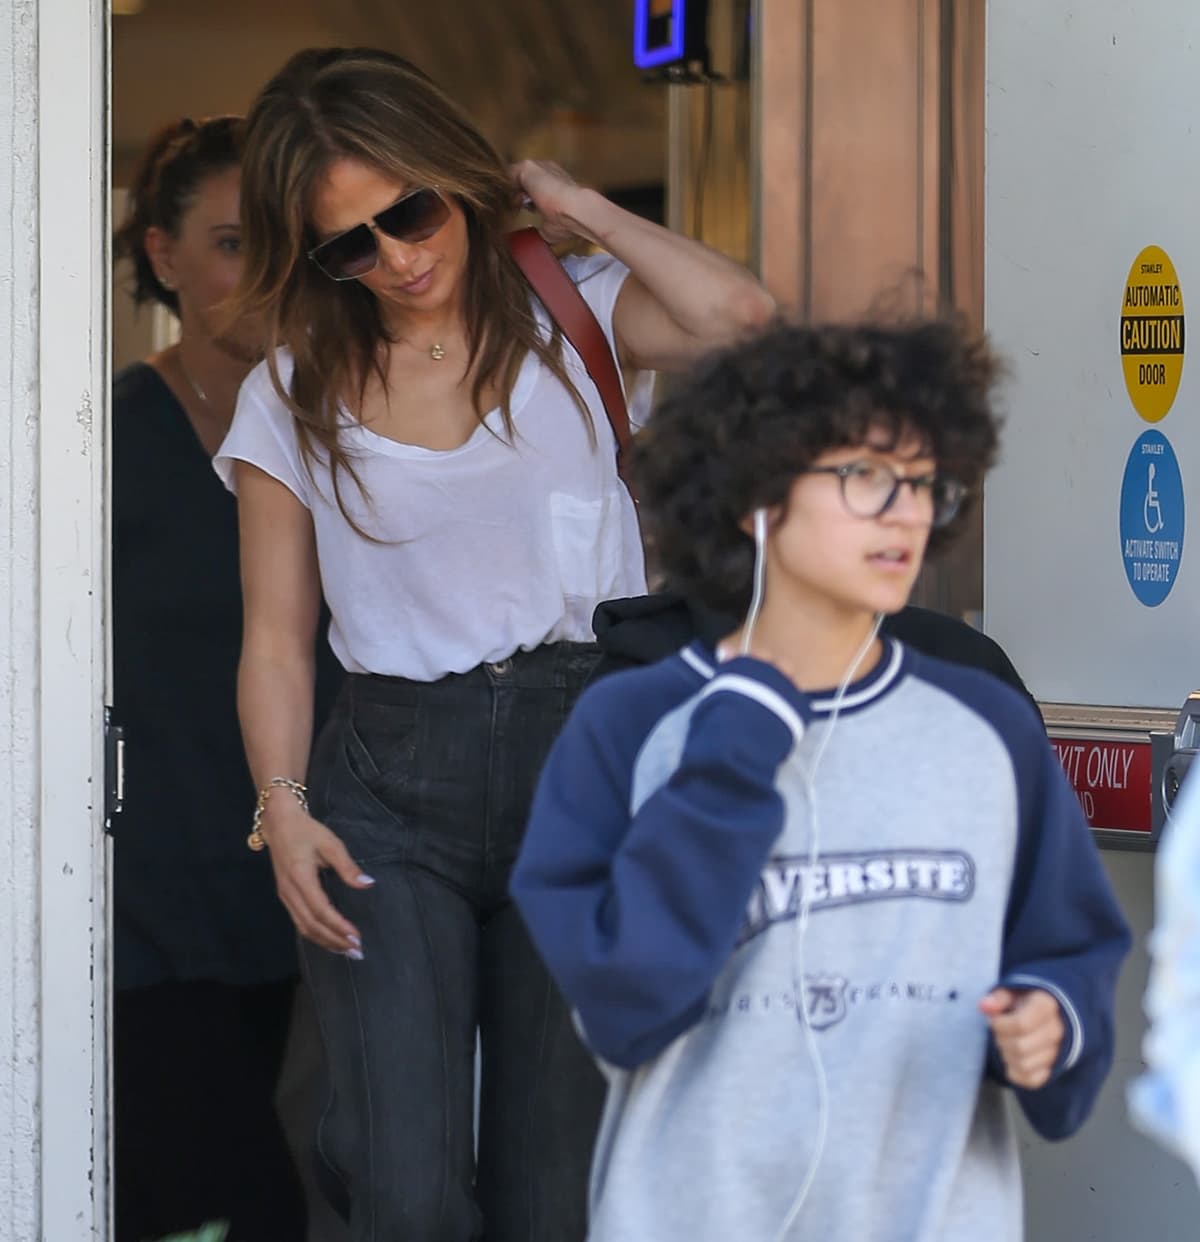 Jennifer Lopez introduced her 14-year-old daughter Emme with gender neutral they/them pronouns